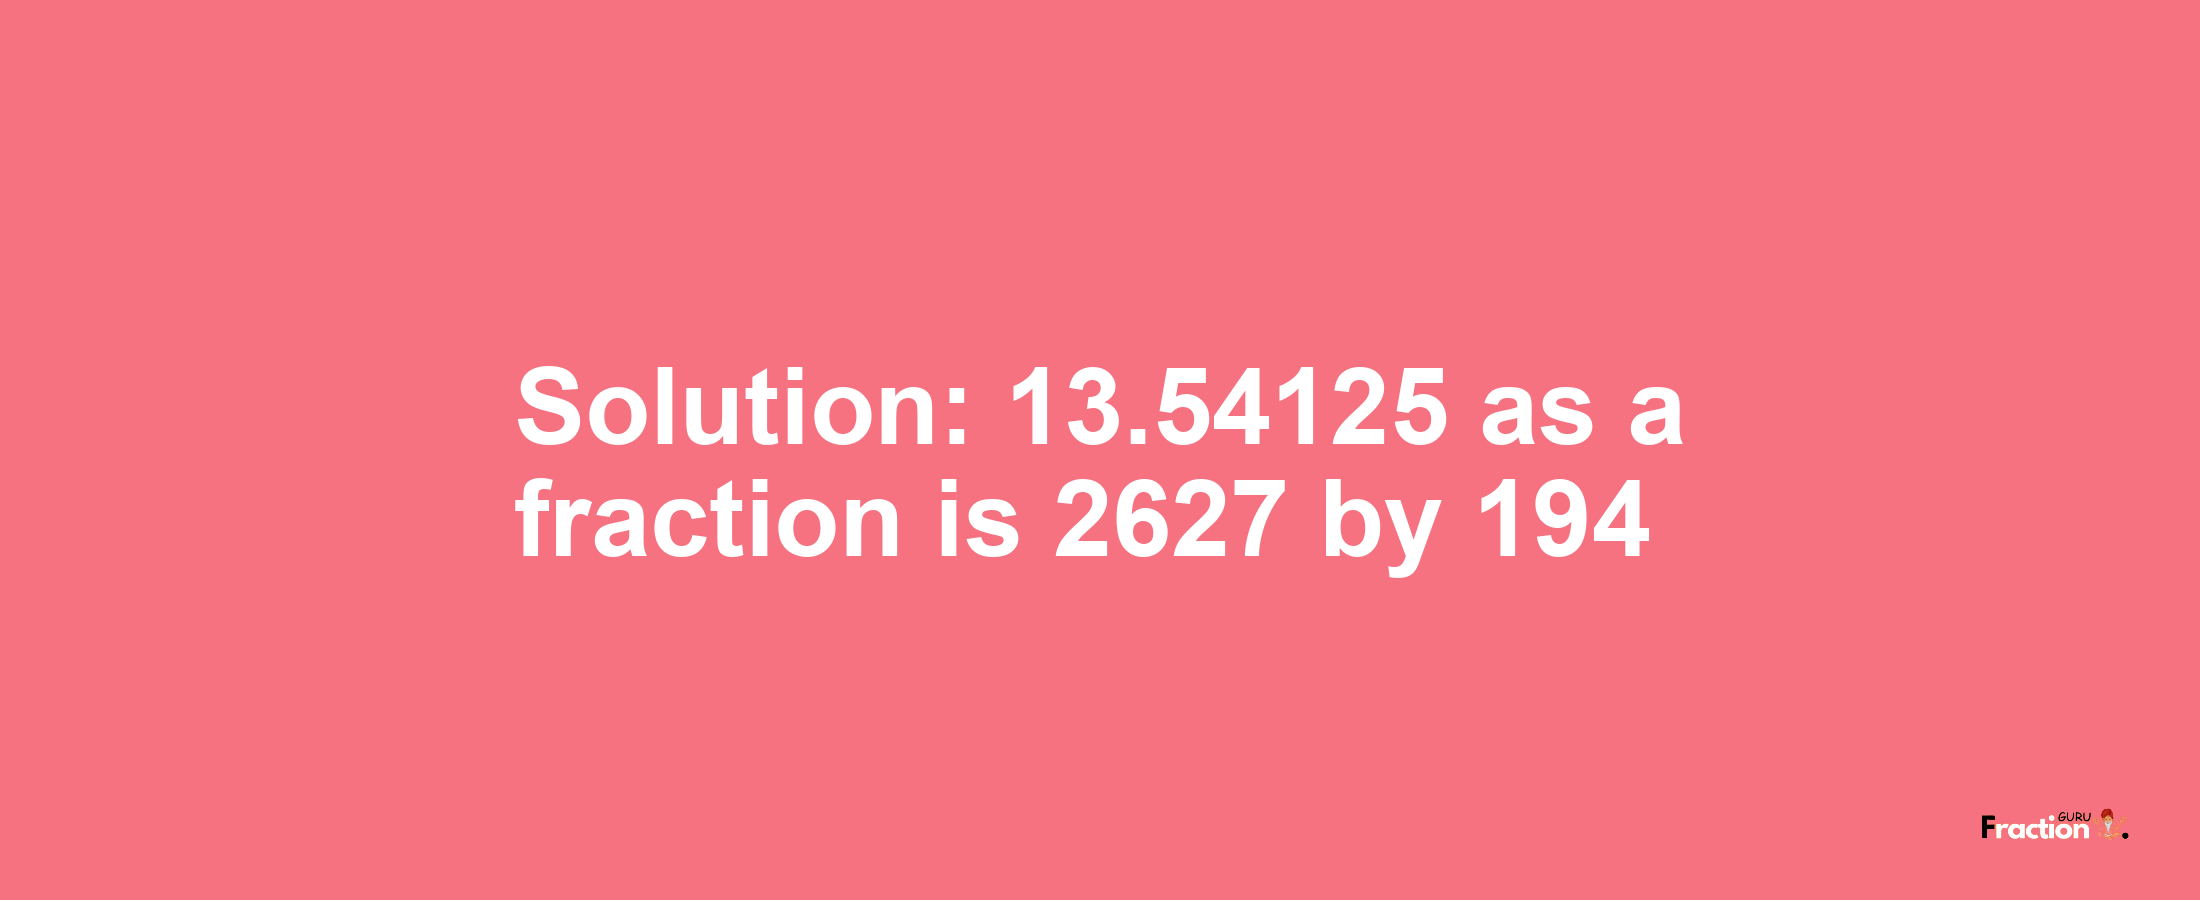 Solution:13.54125 as a fraction is 2627/194